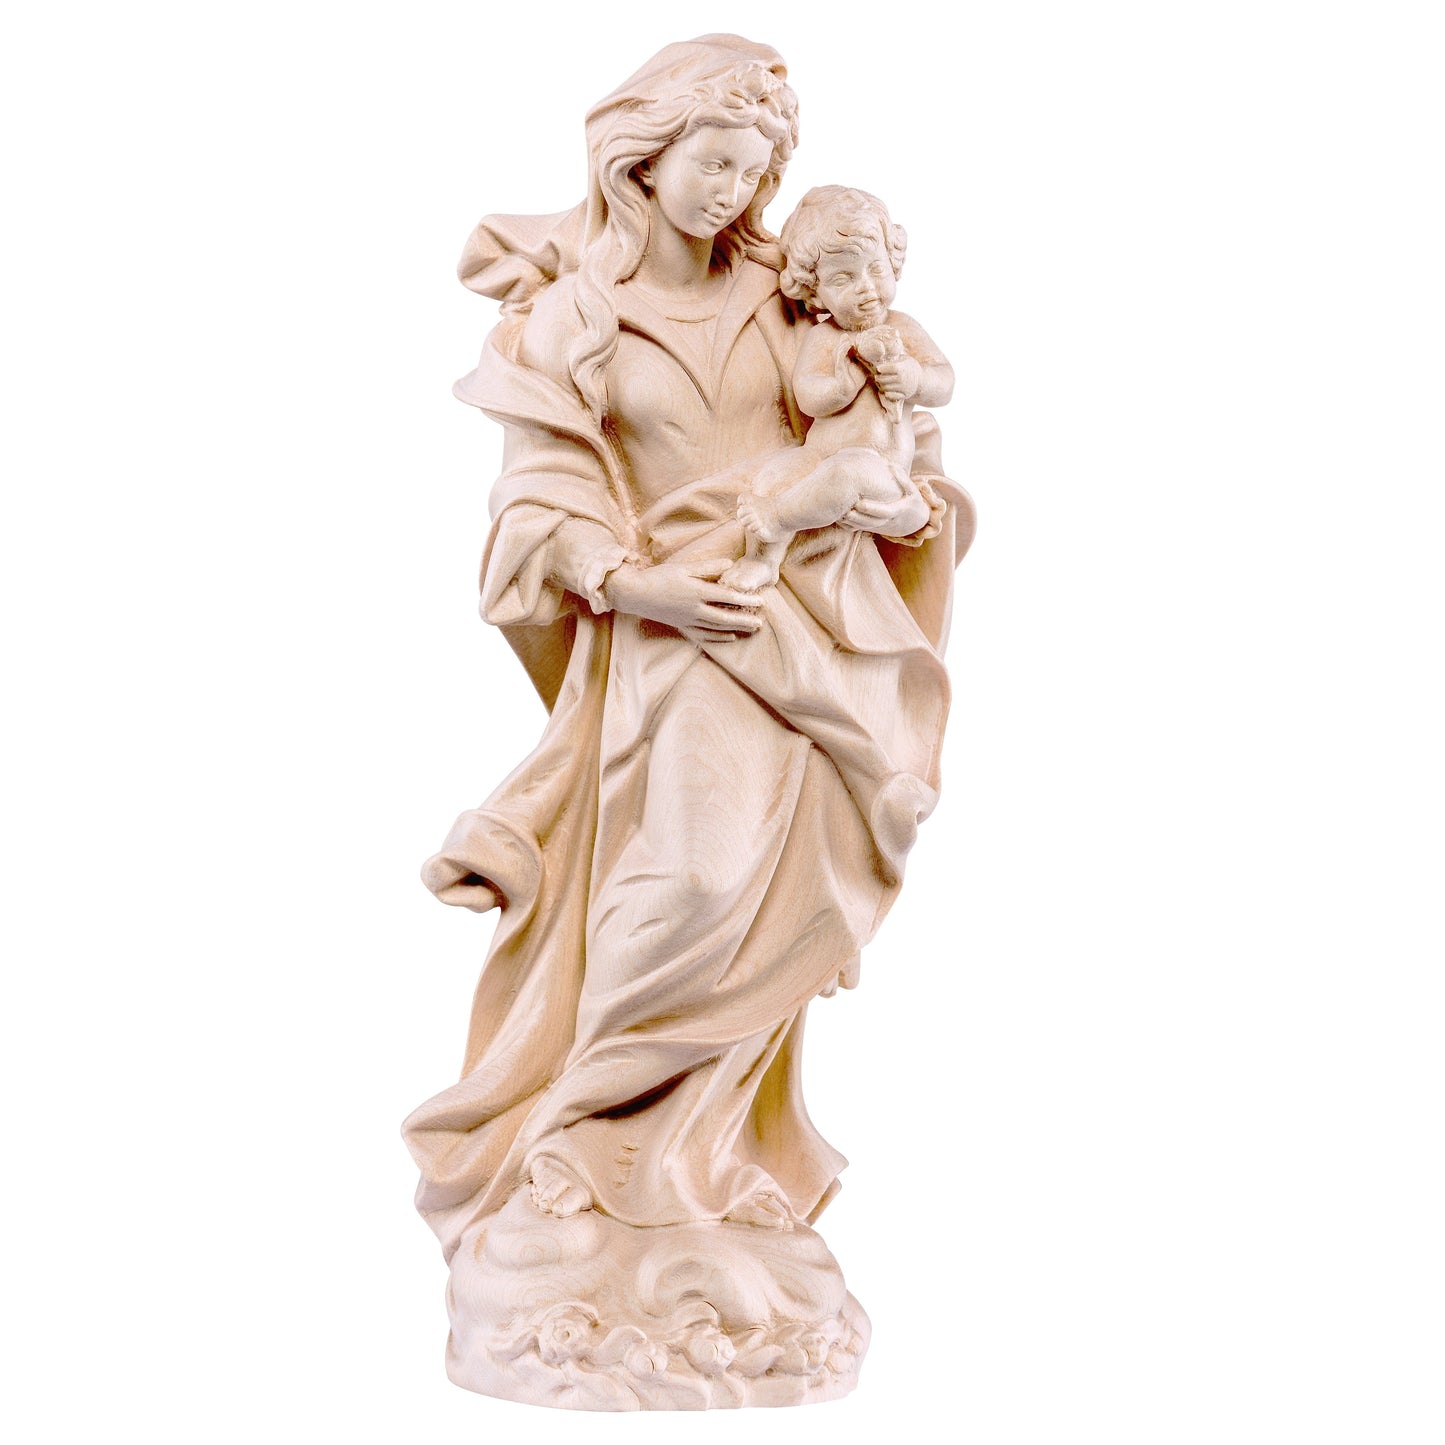 Mondo Cattolico Natural / 15 cm (5.9 in) Wooden statue of Madonna of roses